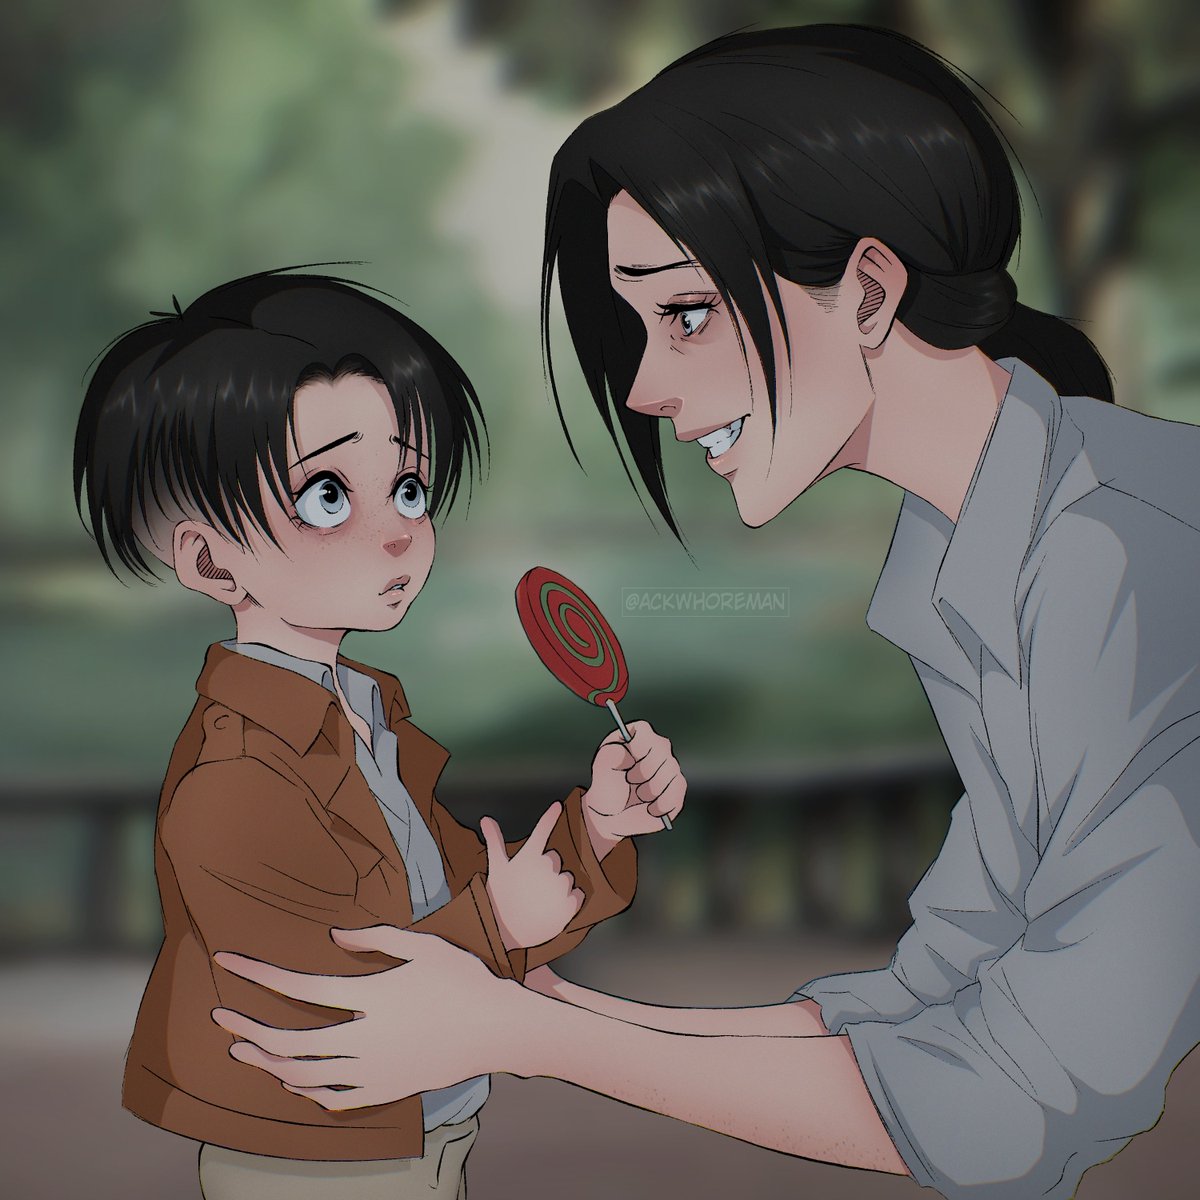 I can't wait to see Levi and Kuchel actually interact, my heart is bursting in anticipation! #LeviBadBoy #leviackerman